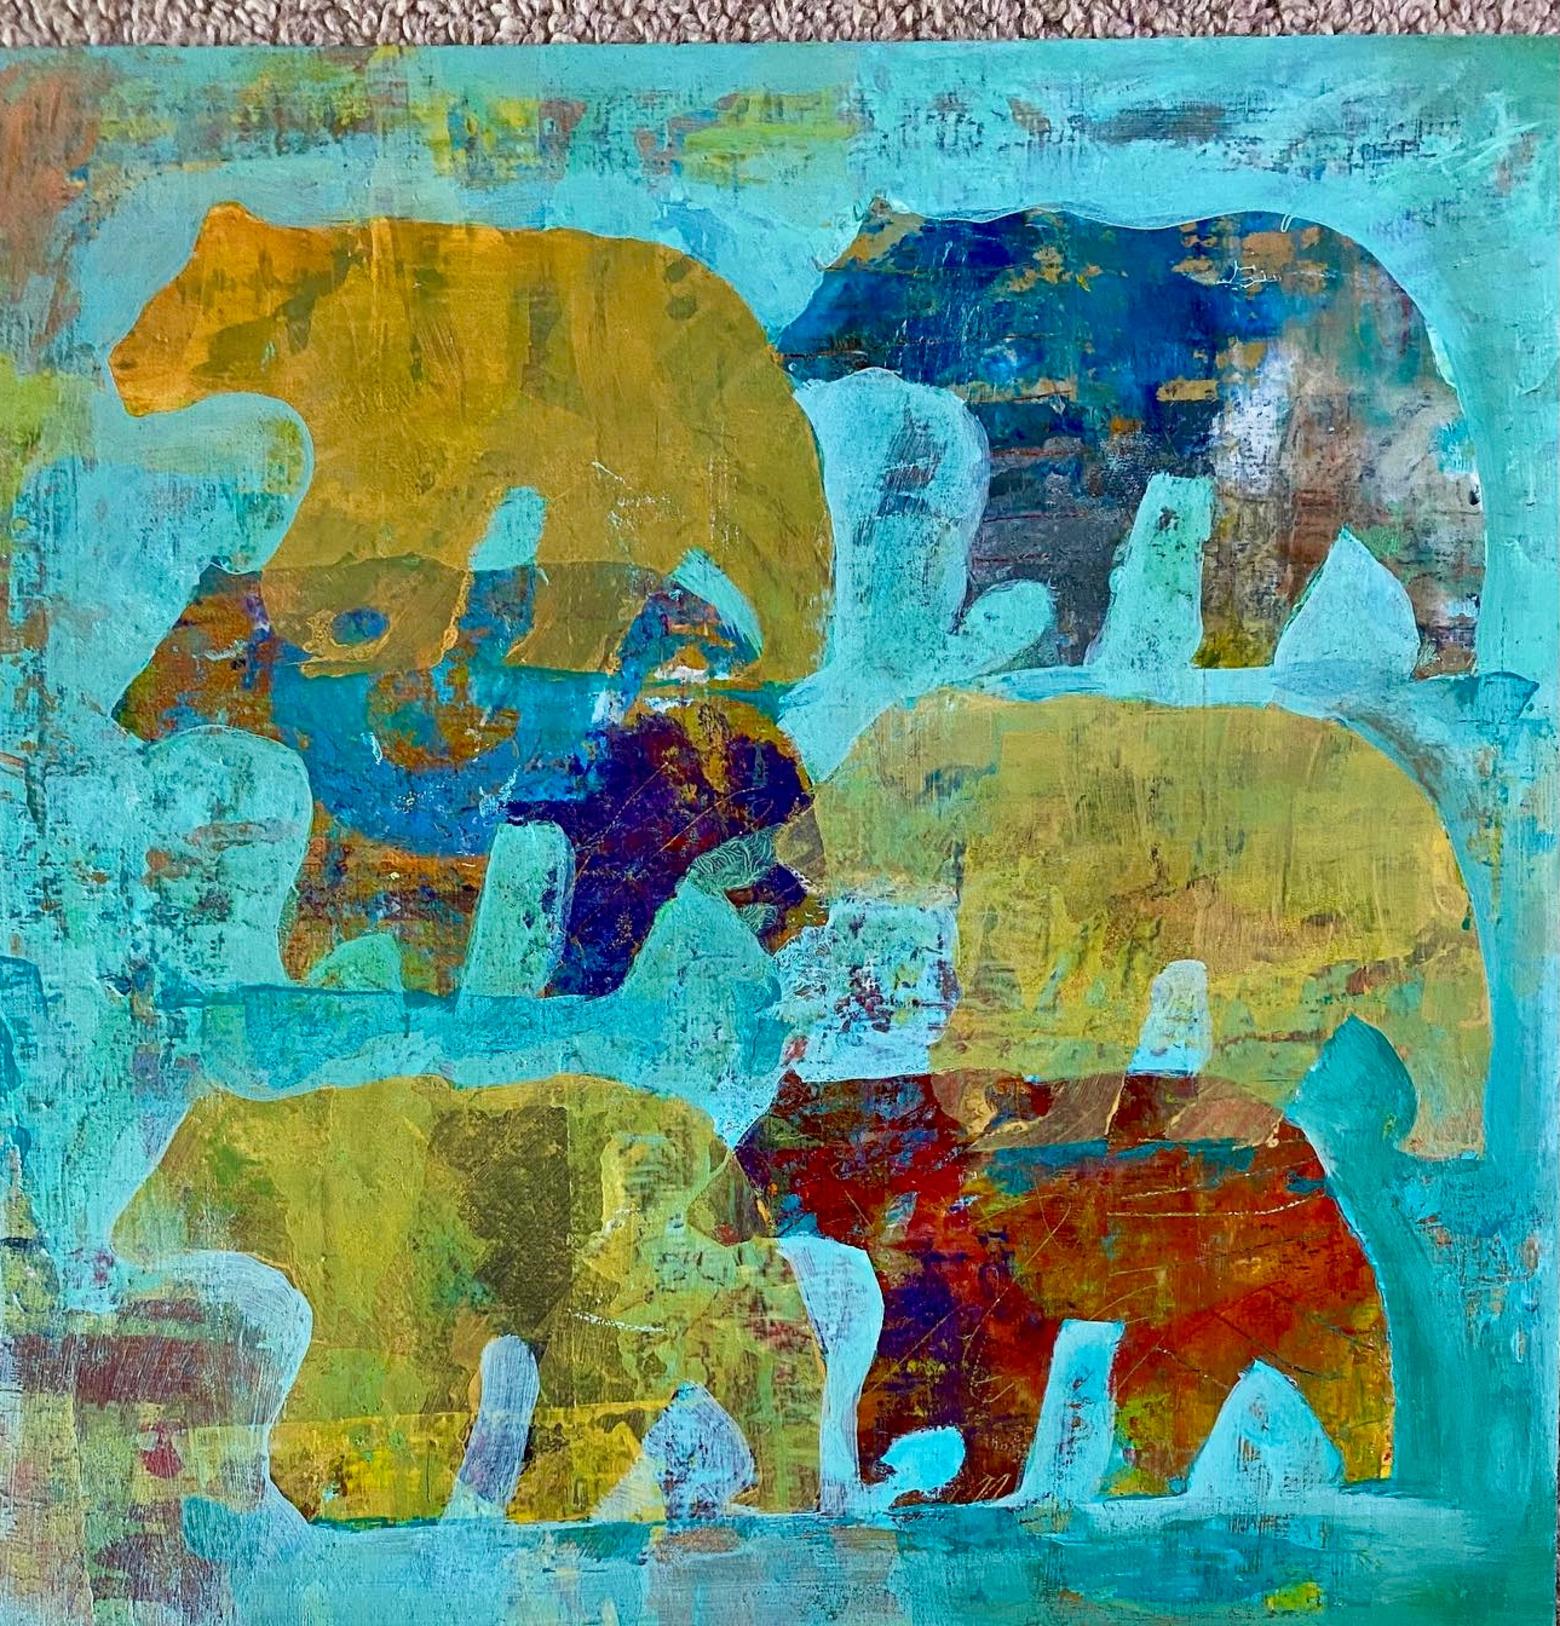 "Bears, bears, and more bears," an original painting, 12 x 12, acrylic on board, by Sue Ewald Cedarholm. To see more of her work, inquire at facebook.com/sue.cedarholm